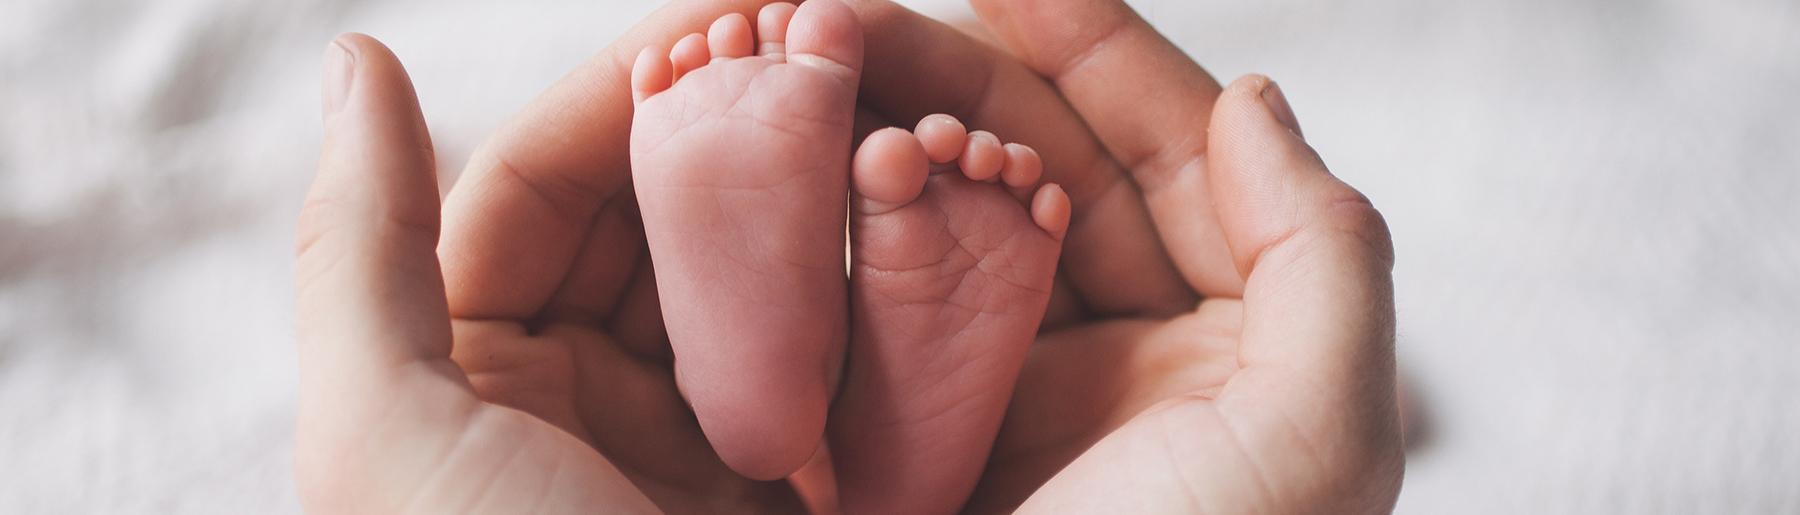 woman hands holding baby feet